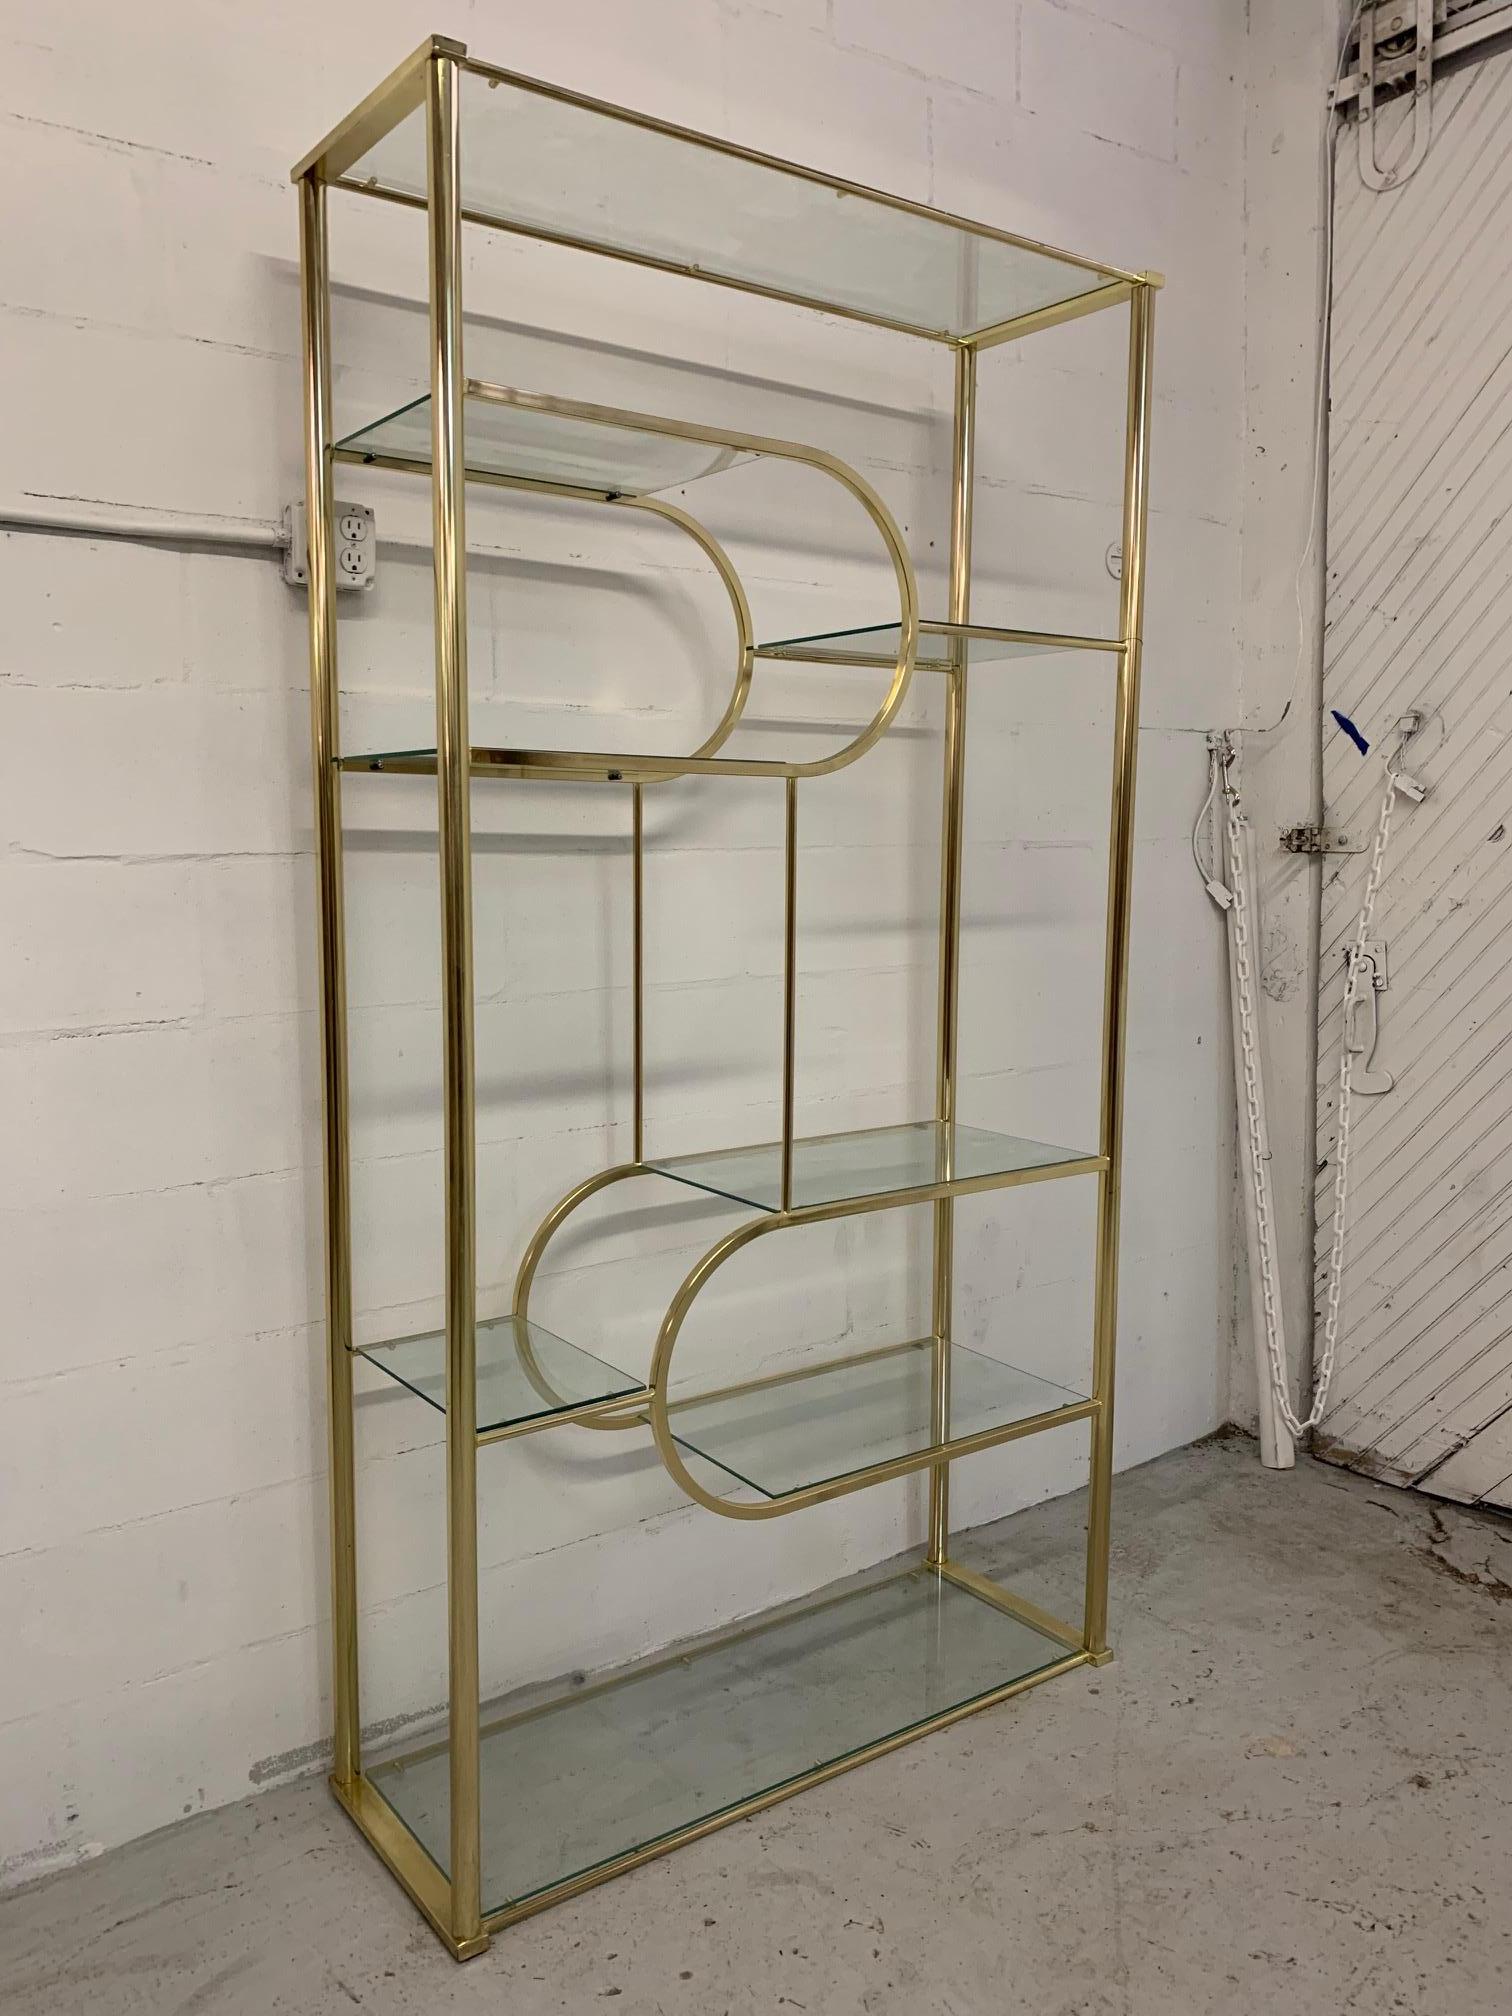 Brass and glass étagère by DIA in the manner of Milo Baughman features glass shelving and a unique design. Good condition with only minor imperfections consistent with age.